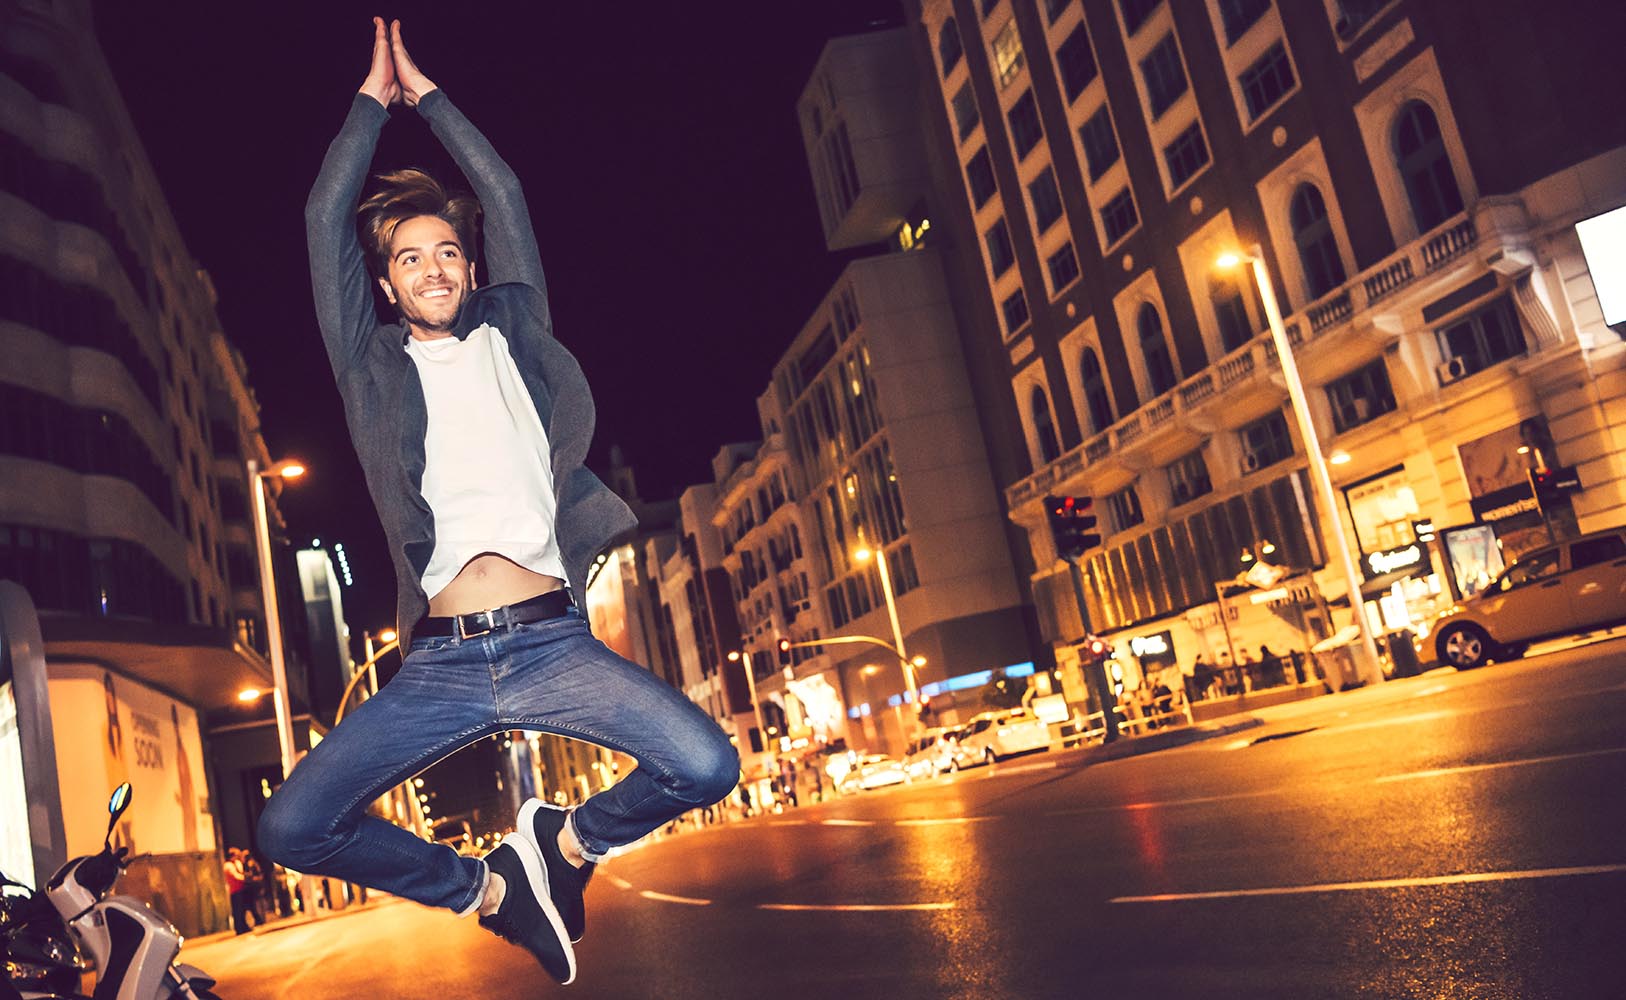 Attractive young caucasian man jumping in a city street at night